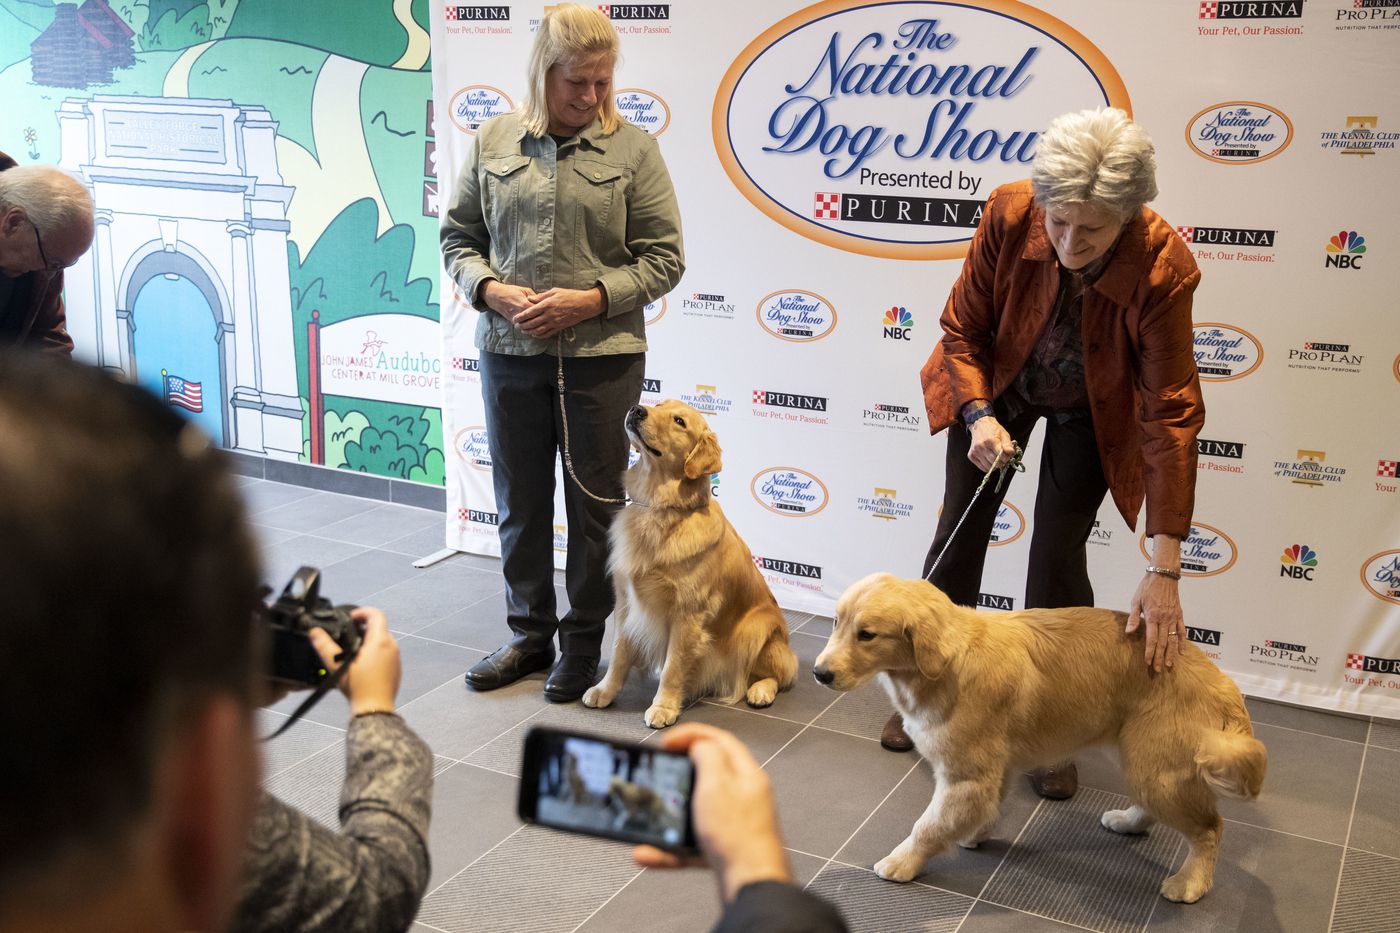 Pet 2,080 dogs at Philadelphia’s National Dog Show this weekend